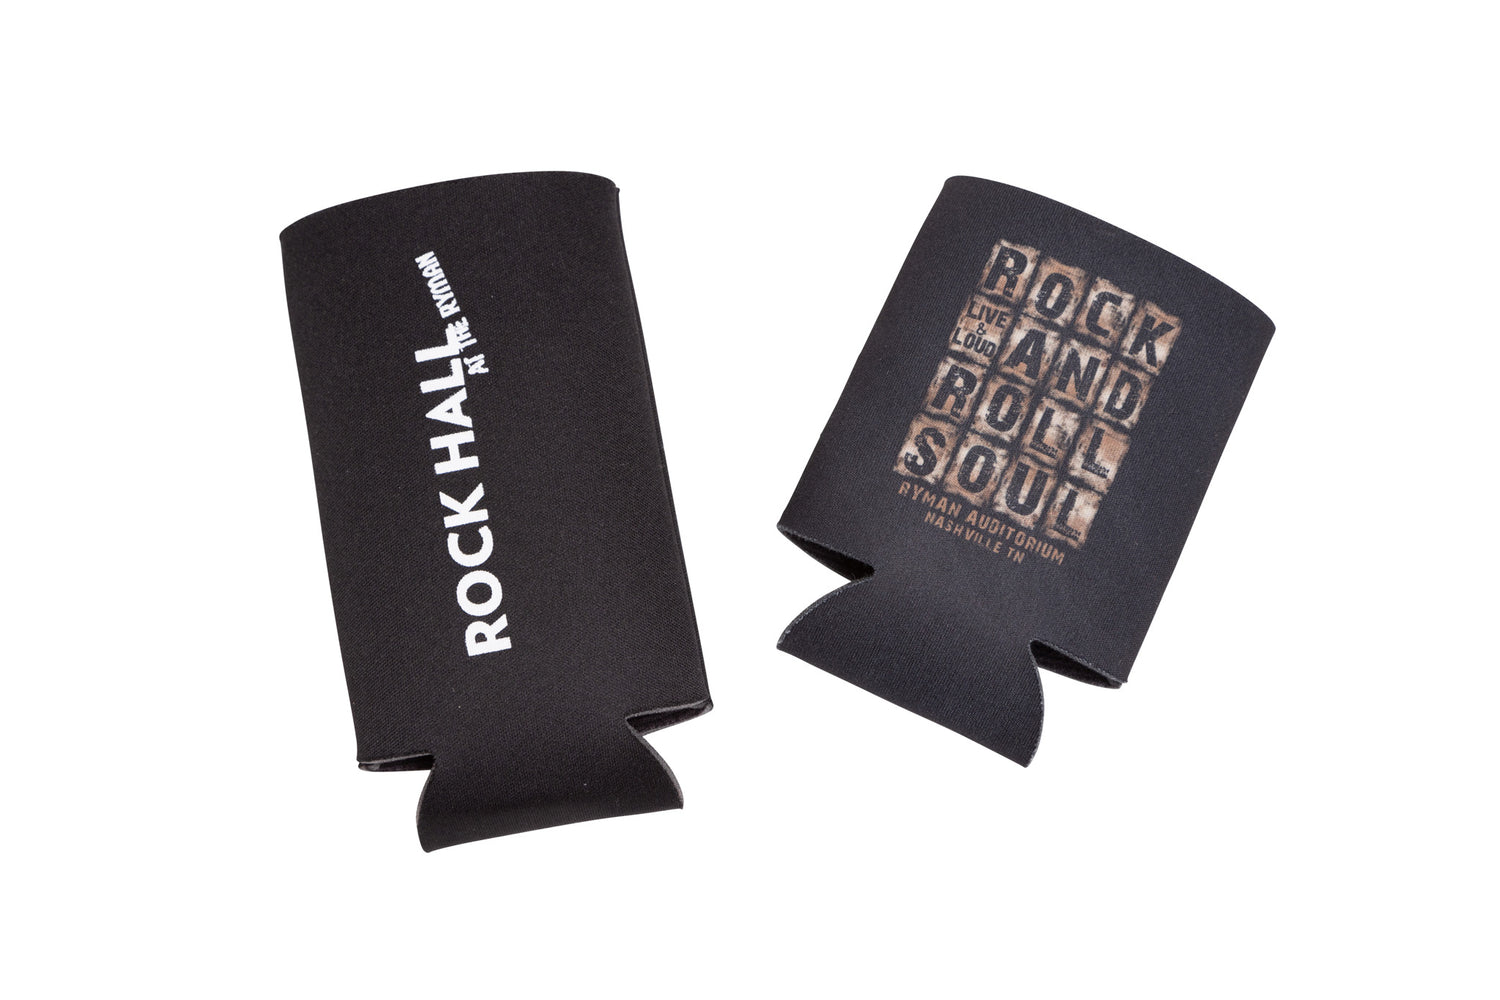 Rock Hall at The Ryman Rock and Roll Soul Koozie